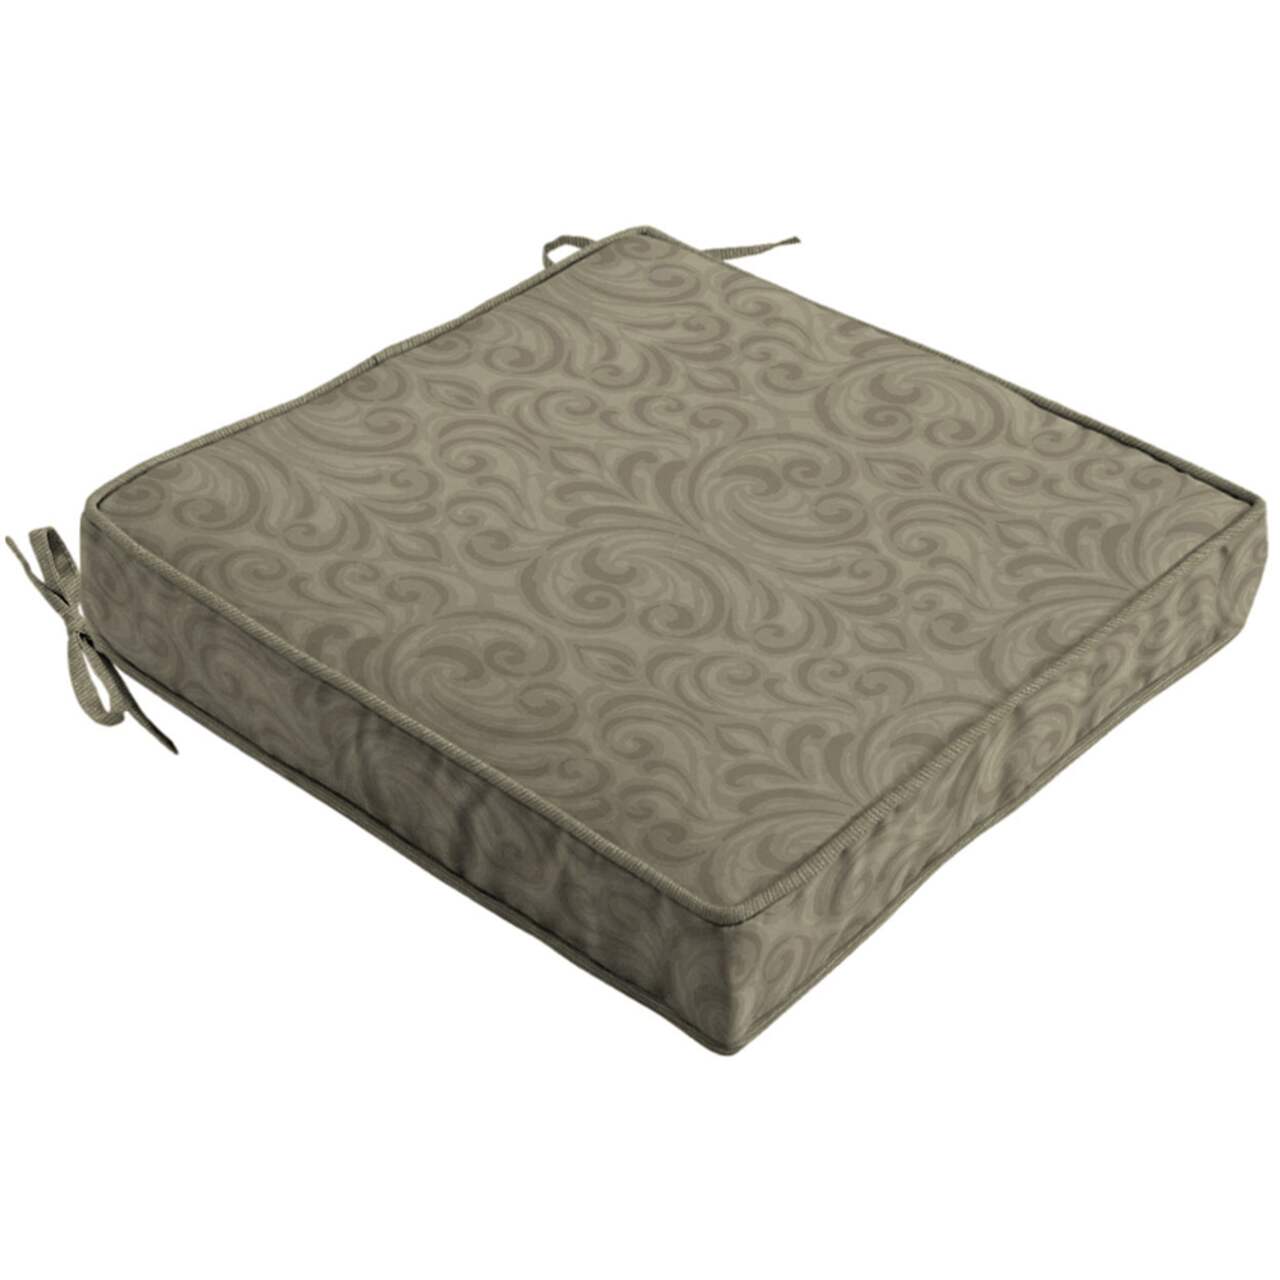 CANVAS Jewel Gate Deluxe Patio Seat Pad Cushion